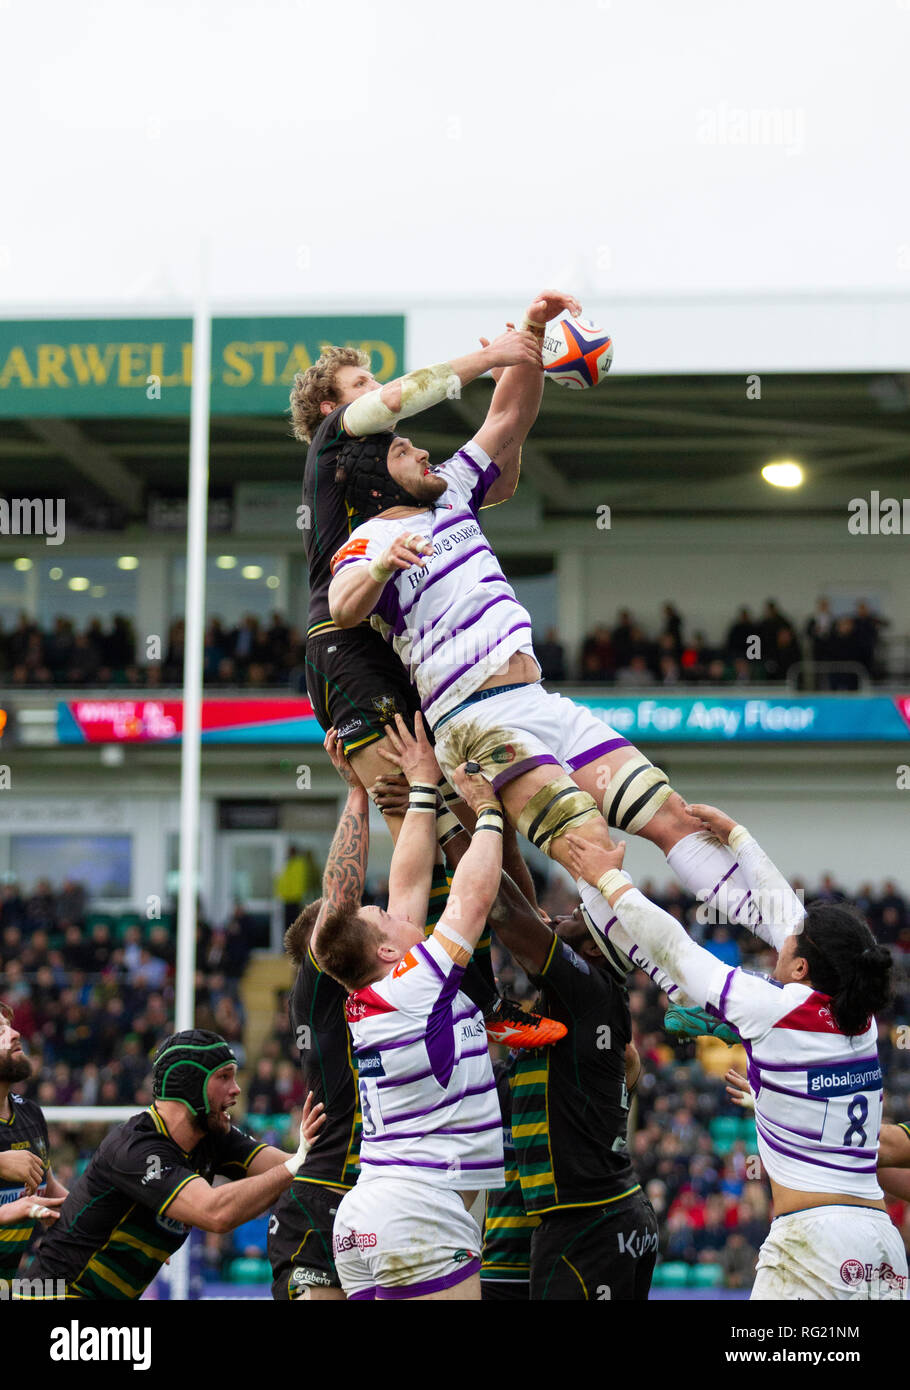 Northampton, UK. 26th January 2019. Harry Wells of Competes with Jamie Gibson in a line out during the Premiership Rugby Cup match between Northampton Saints and Leicester Tigers. Andrew Taylor/Alamy Live News Stock Photo